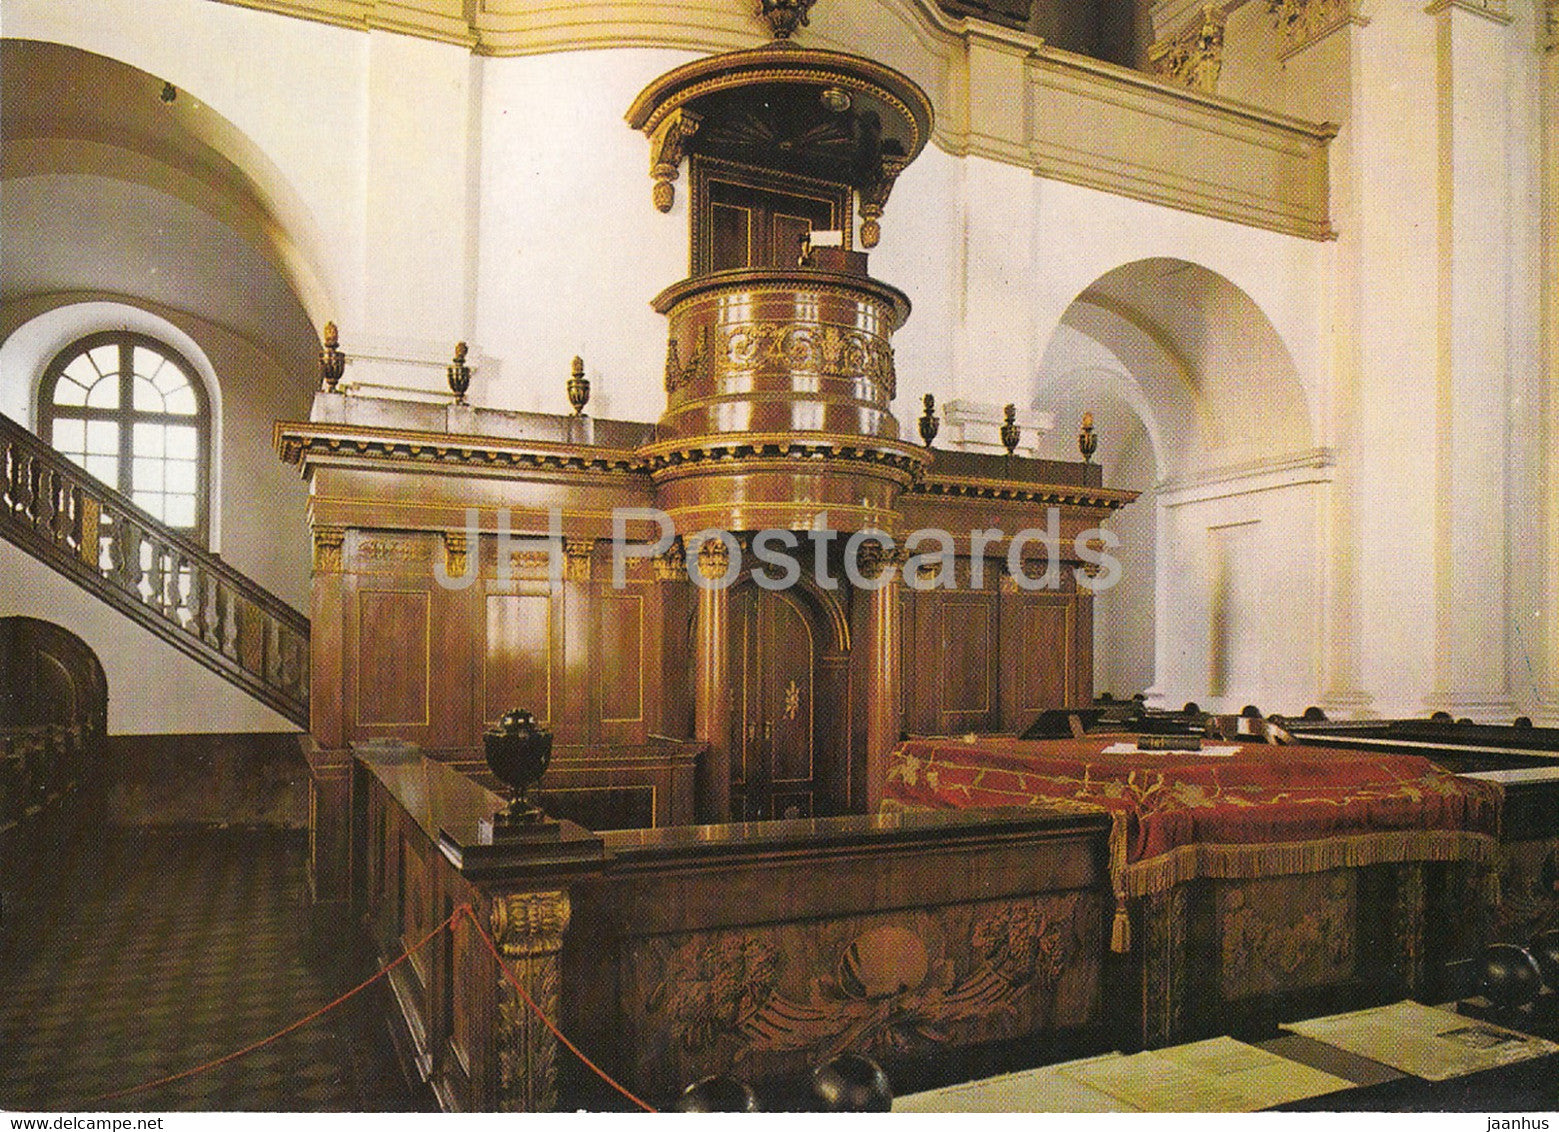 Debrecen - The Great Protestant Church - Hungary - unused - JH Postcards